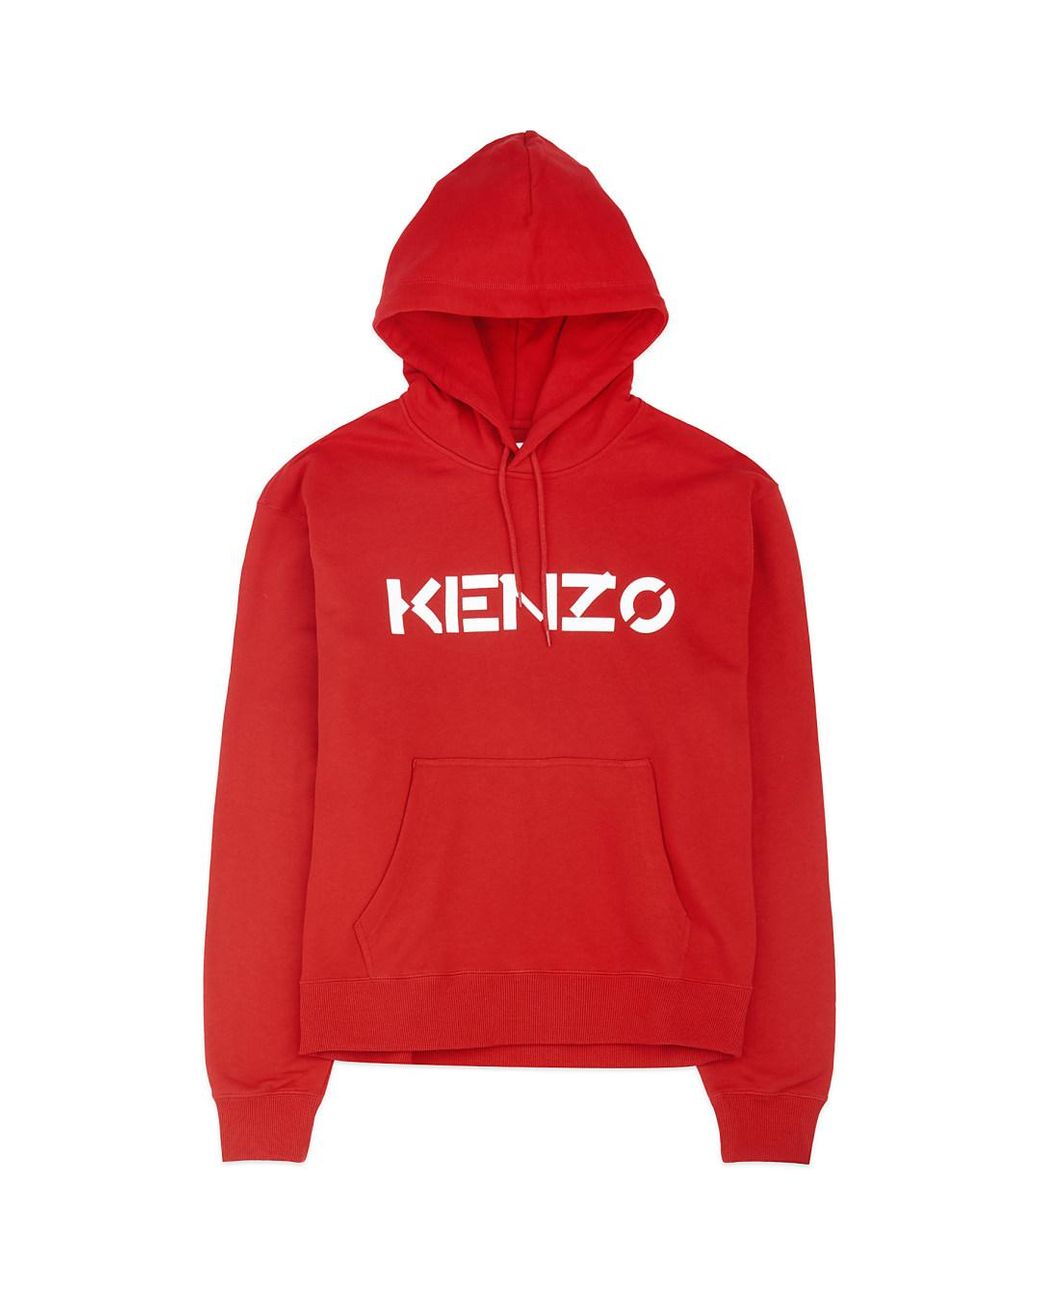 KENZO Cotton Logo Hoodie in Cherry (Red) for Men - Lyst